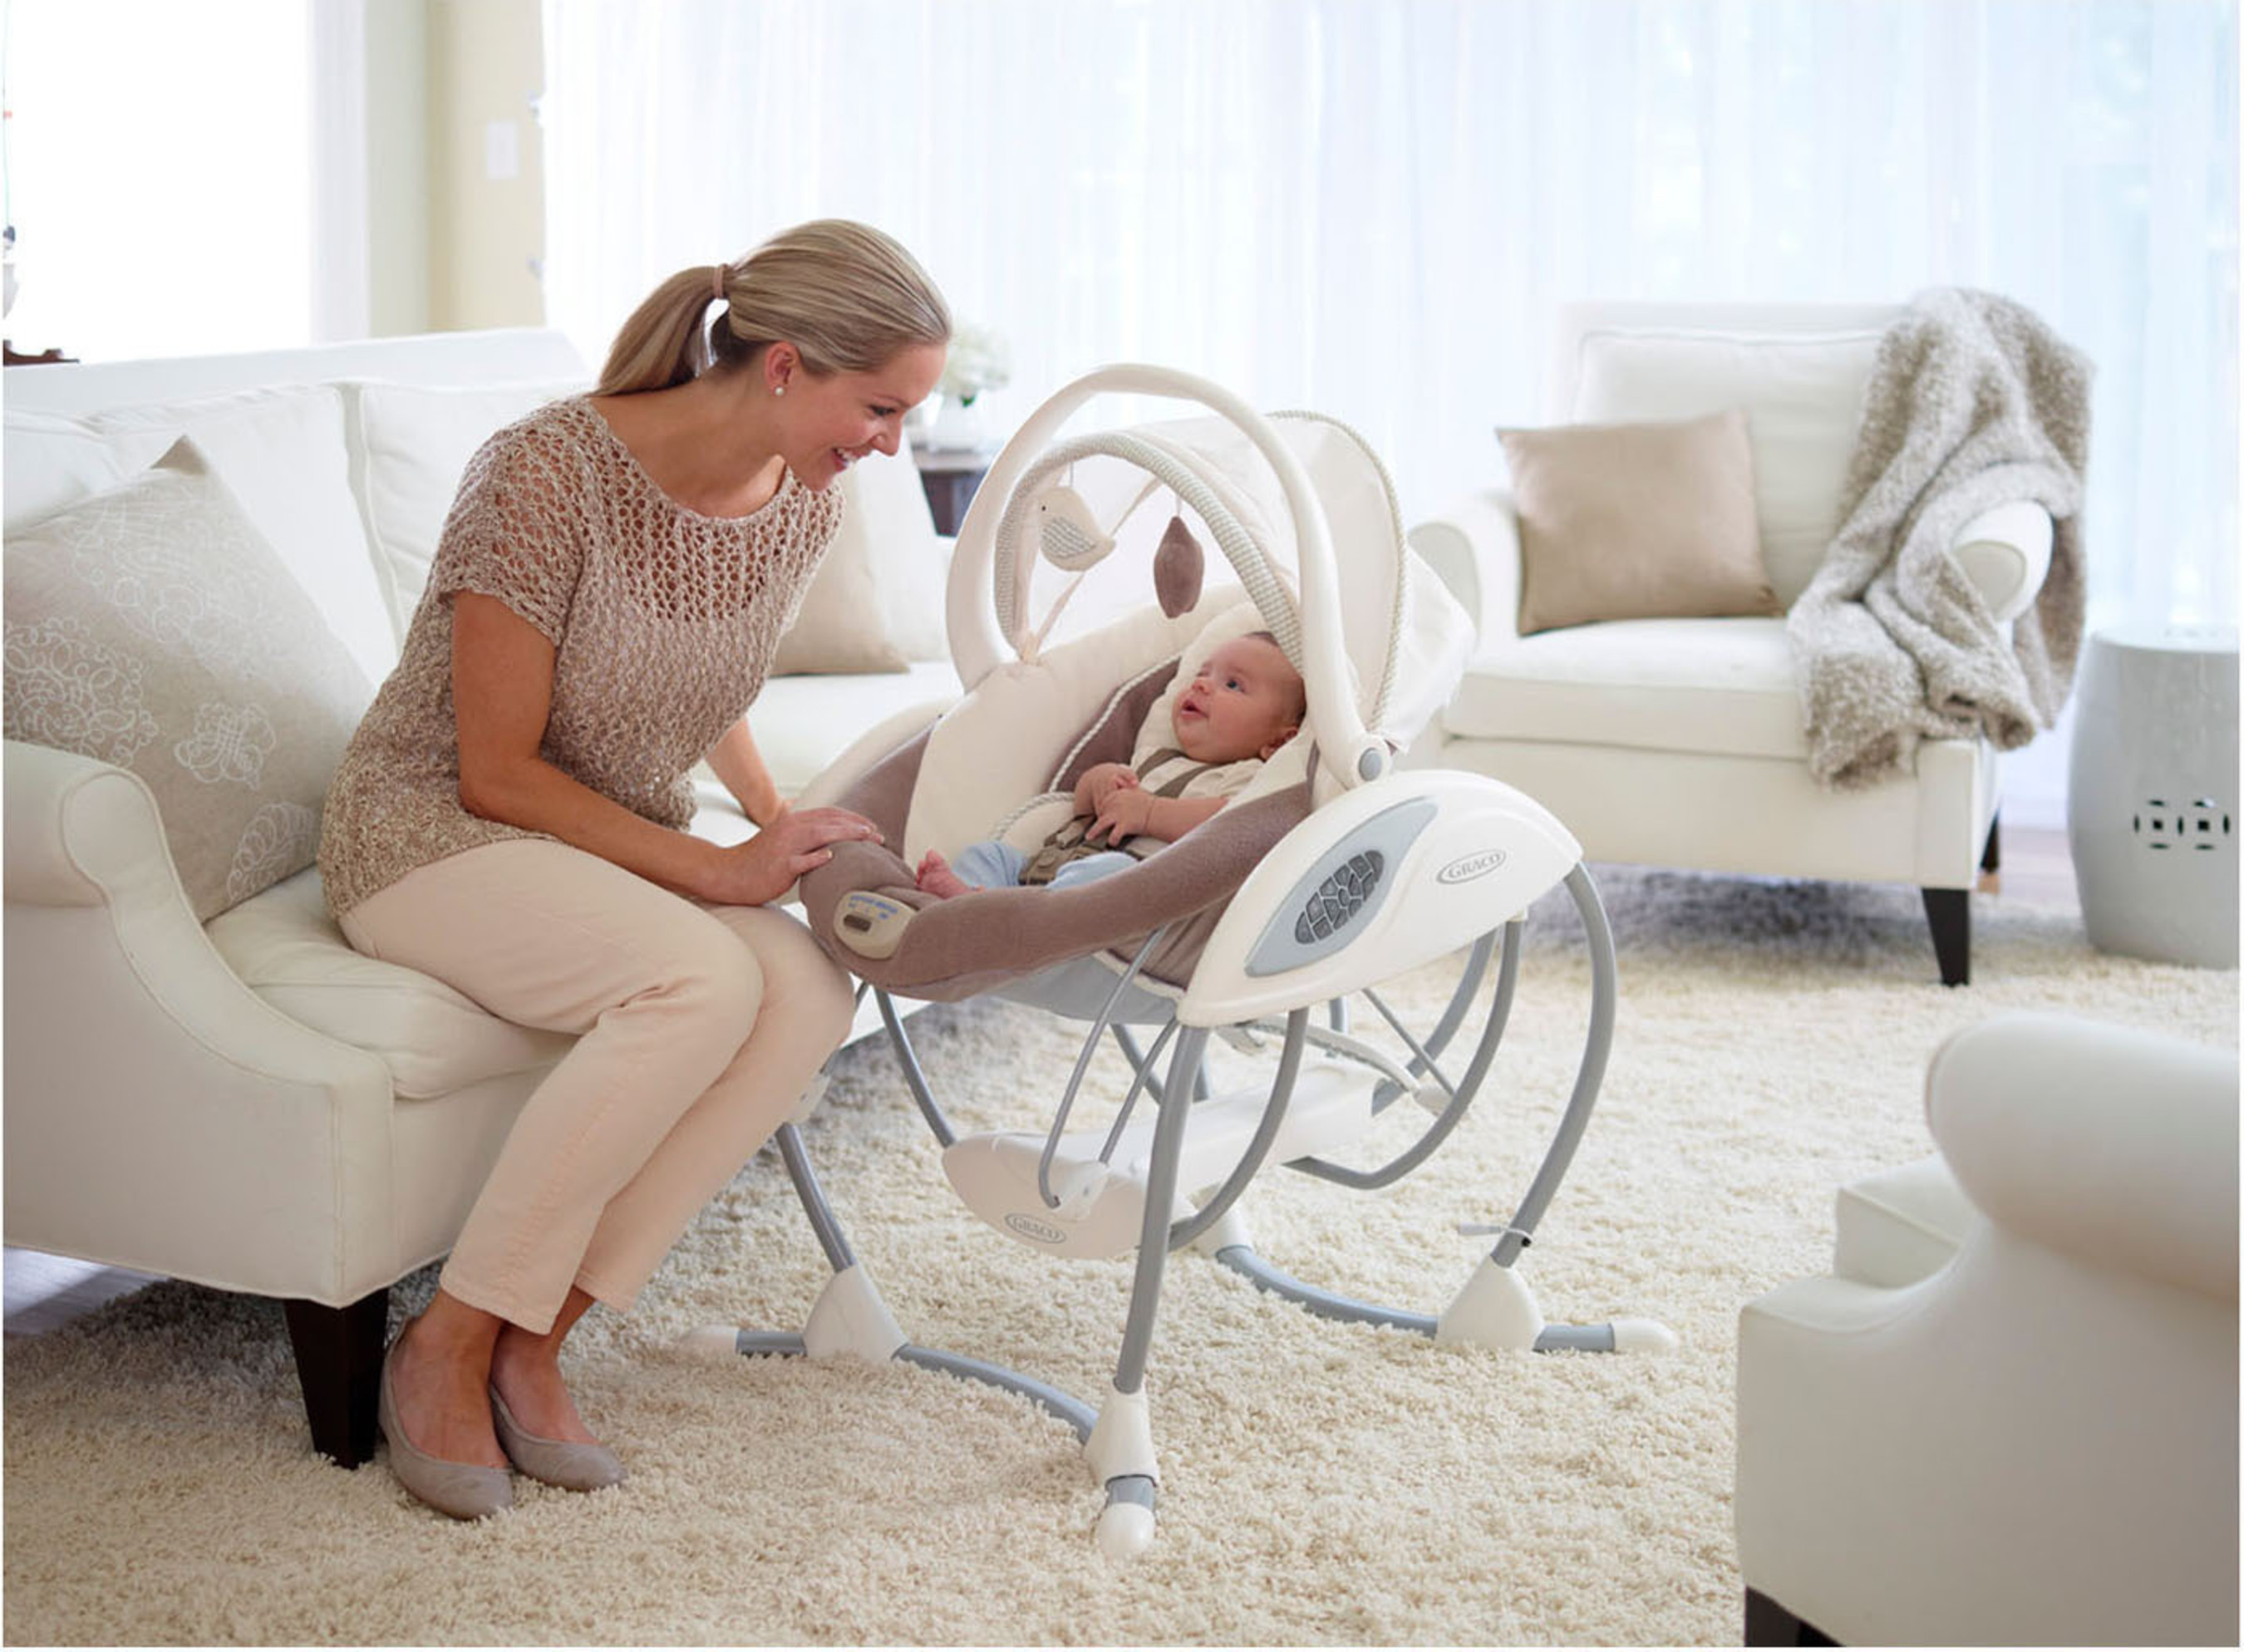 The Graco Glider family of swings aims to reinvent the swing category through the first introduction of the gliding motion into a baby swing. (PRNewsFoto/Graco) (PRNewsFoto/GRACO)